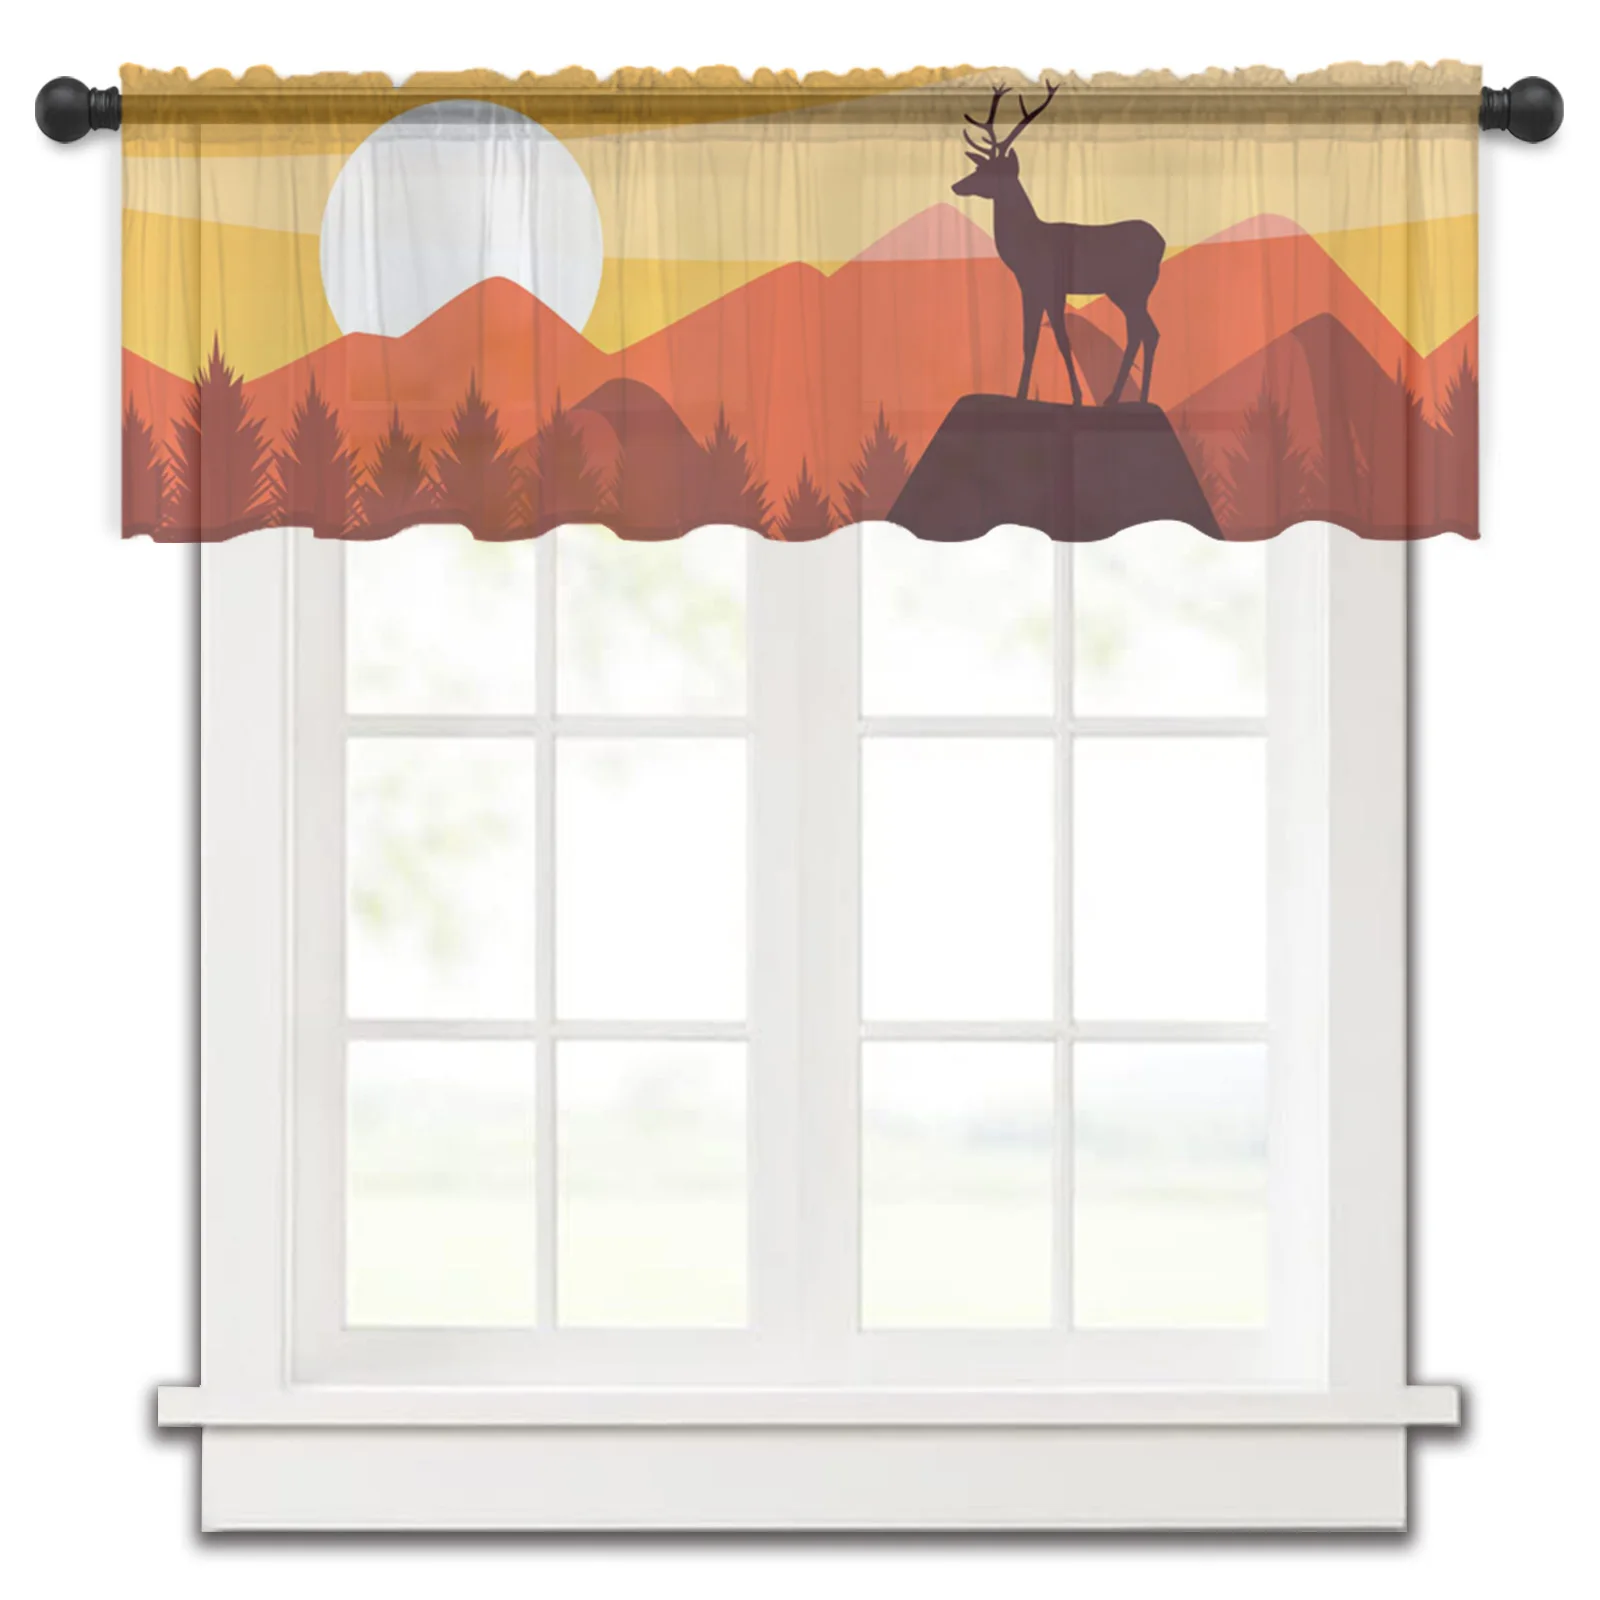 

Deer Silhouette Sunset Kitchen Small Window Curtain Tulle Sheer Short Curtain Bedroom Living Room Home Decor Voile Drapes